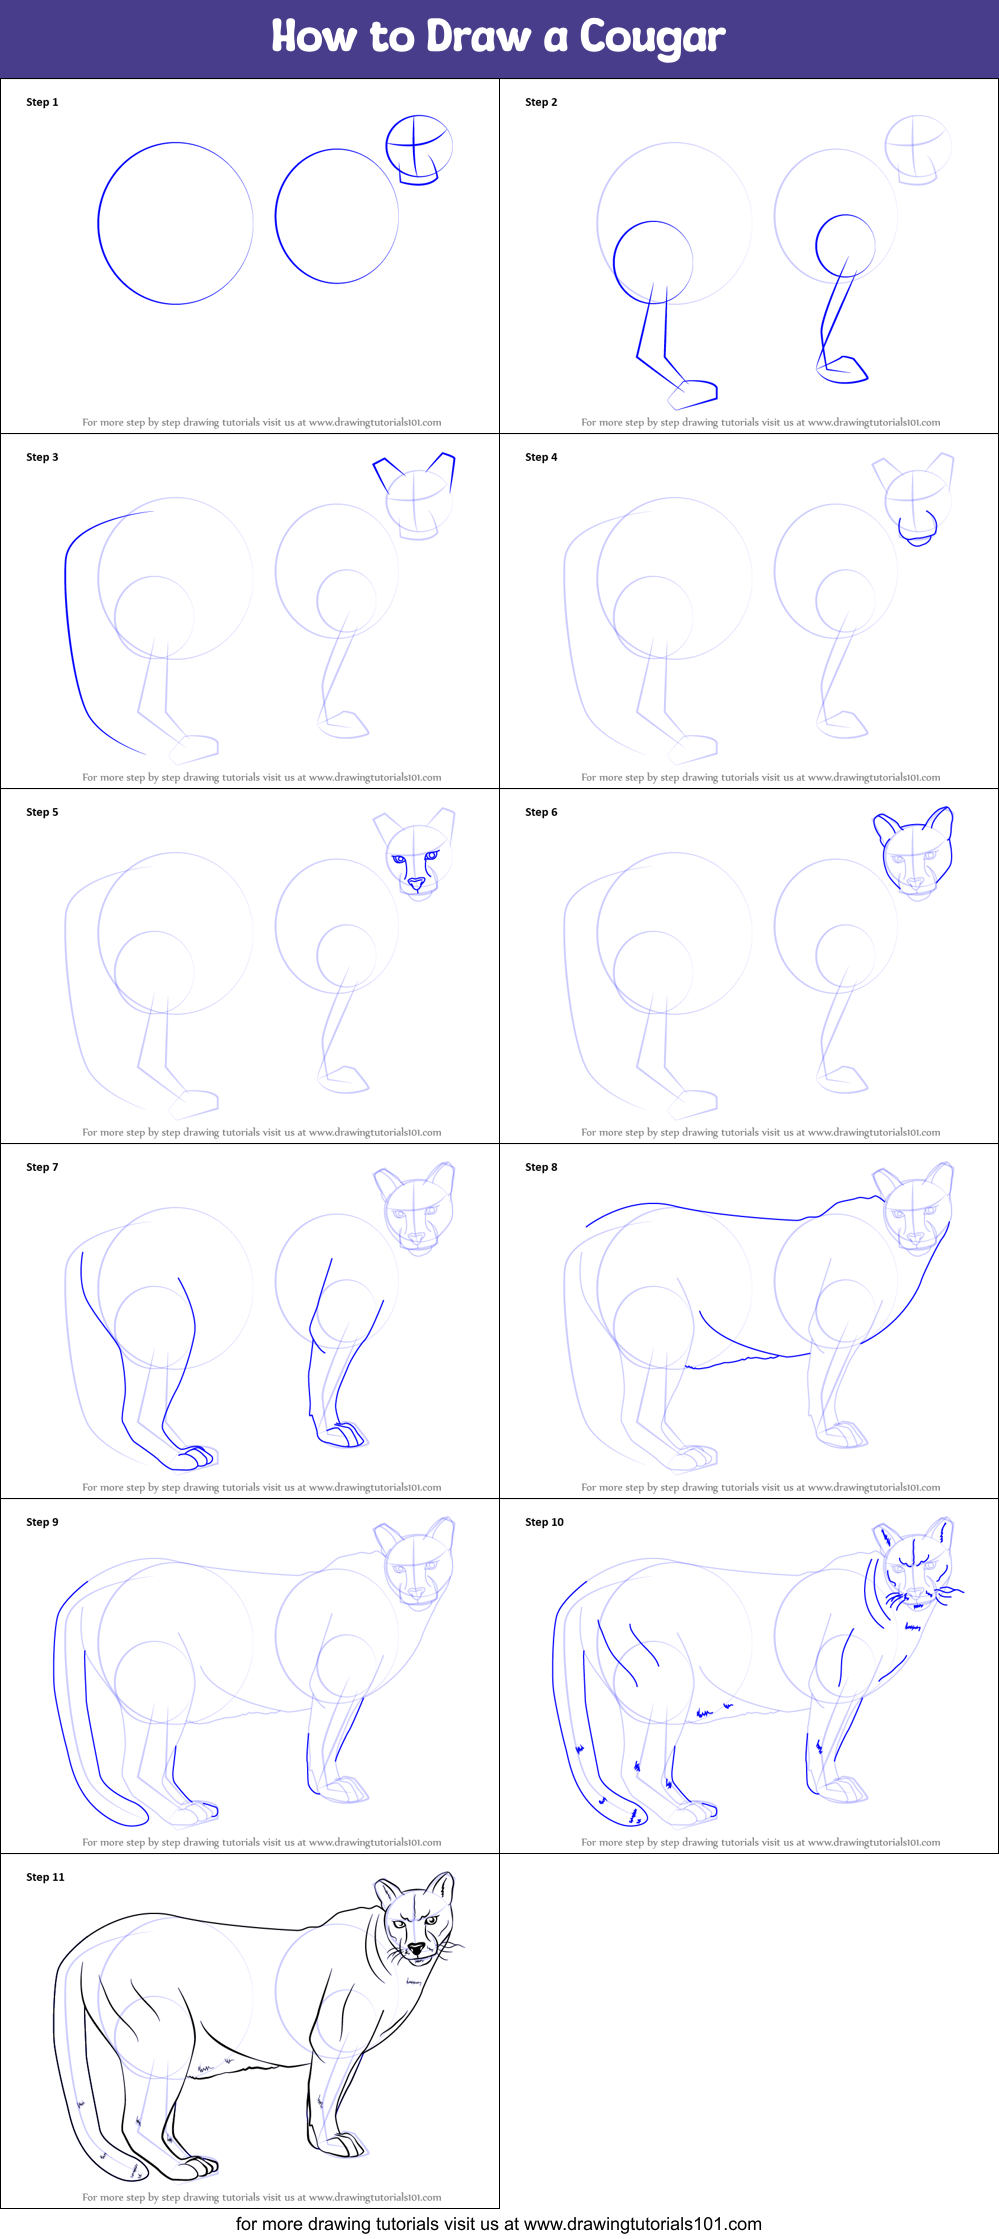 How to Draw a Cougar printable step by step drawing sheet